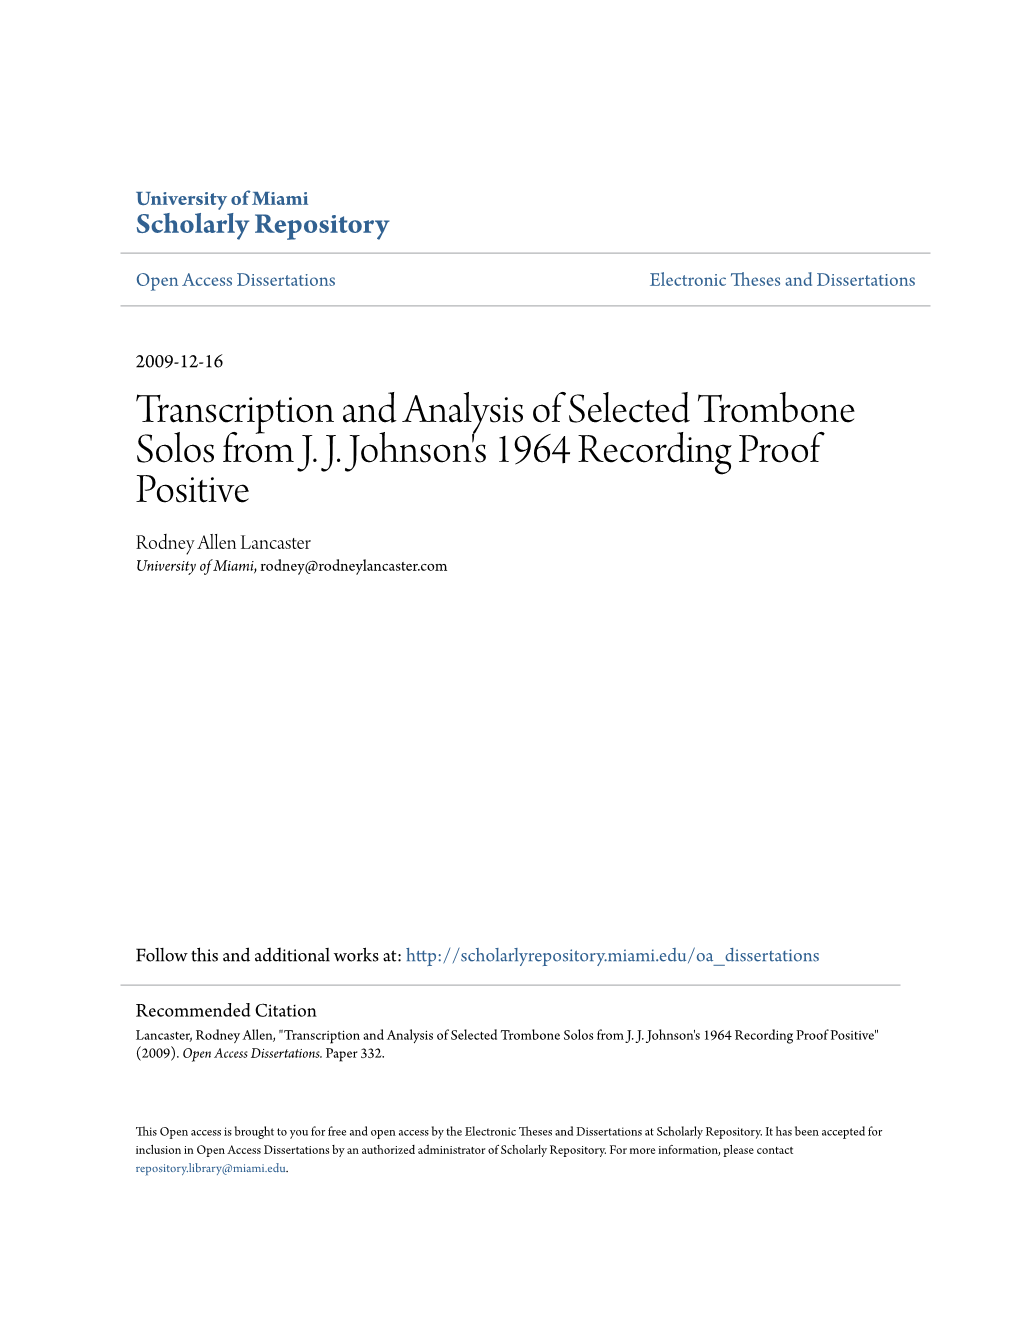 Transcription and Analysis of Selected Trombone Solos from J. J